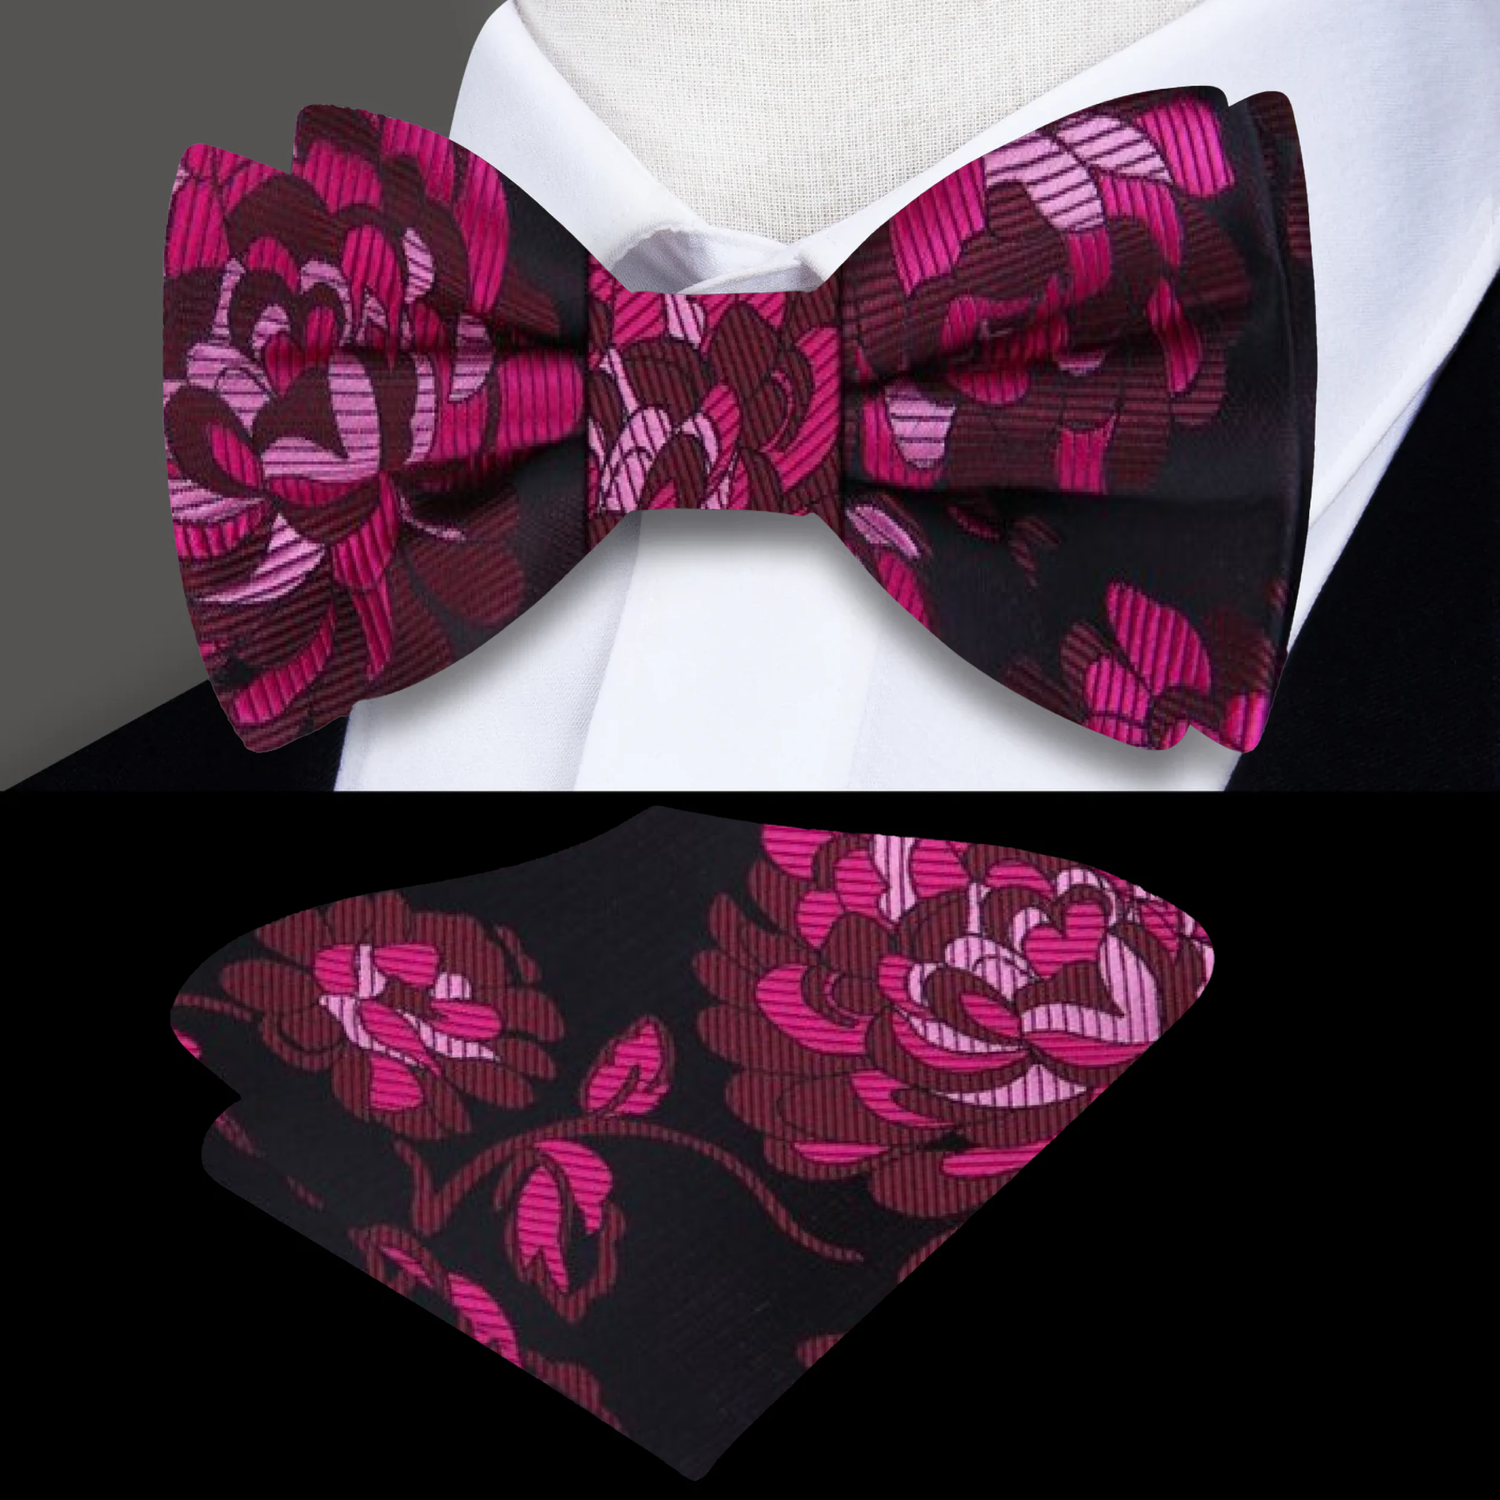 Sangria, Pink and Burgundy Large Flowers Bow Tie And Pocket Square||Sangria